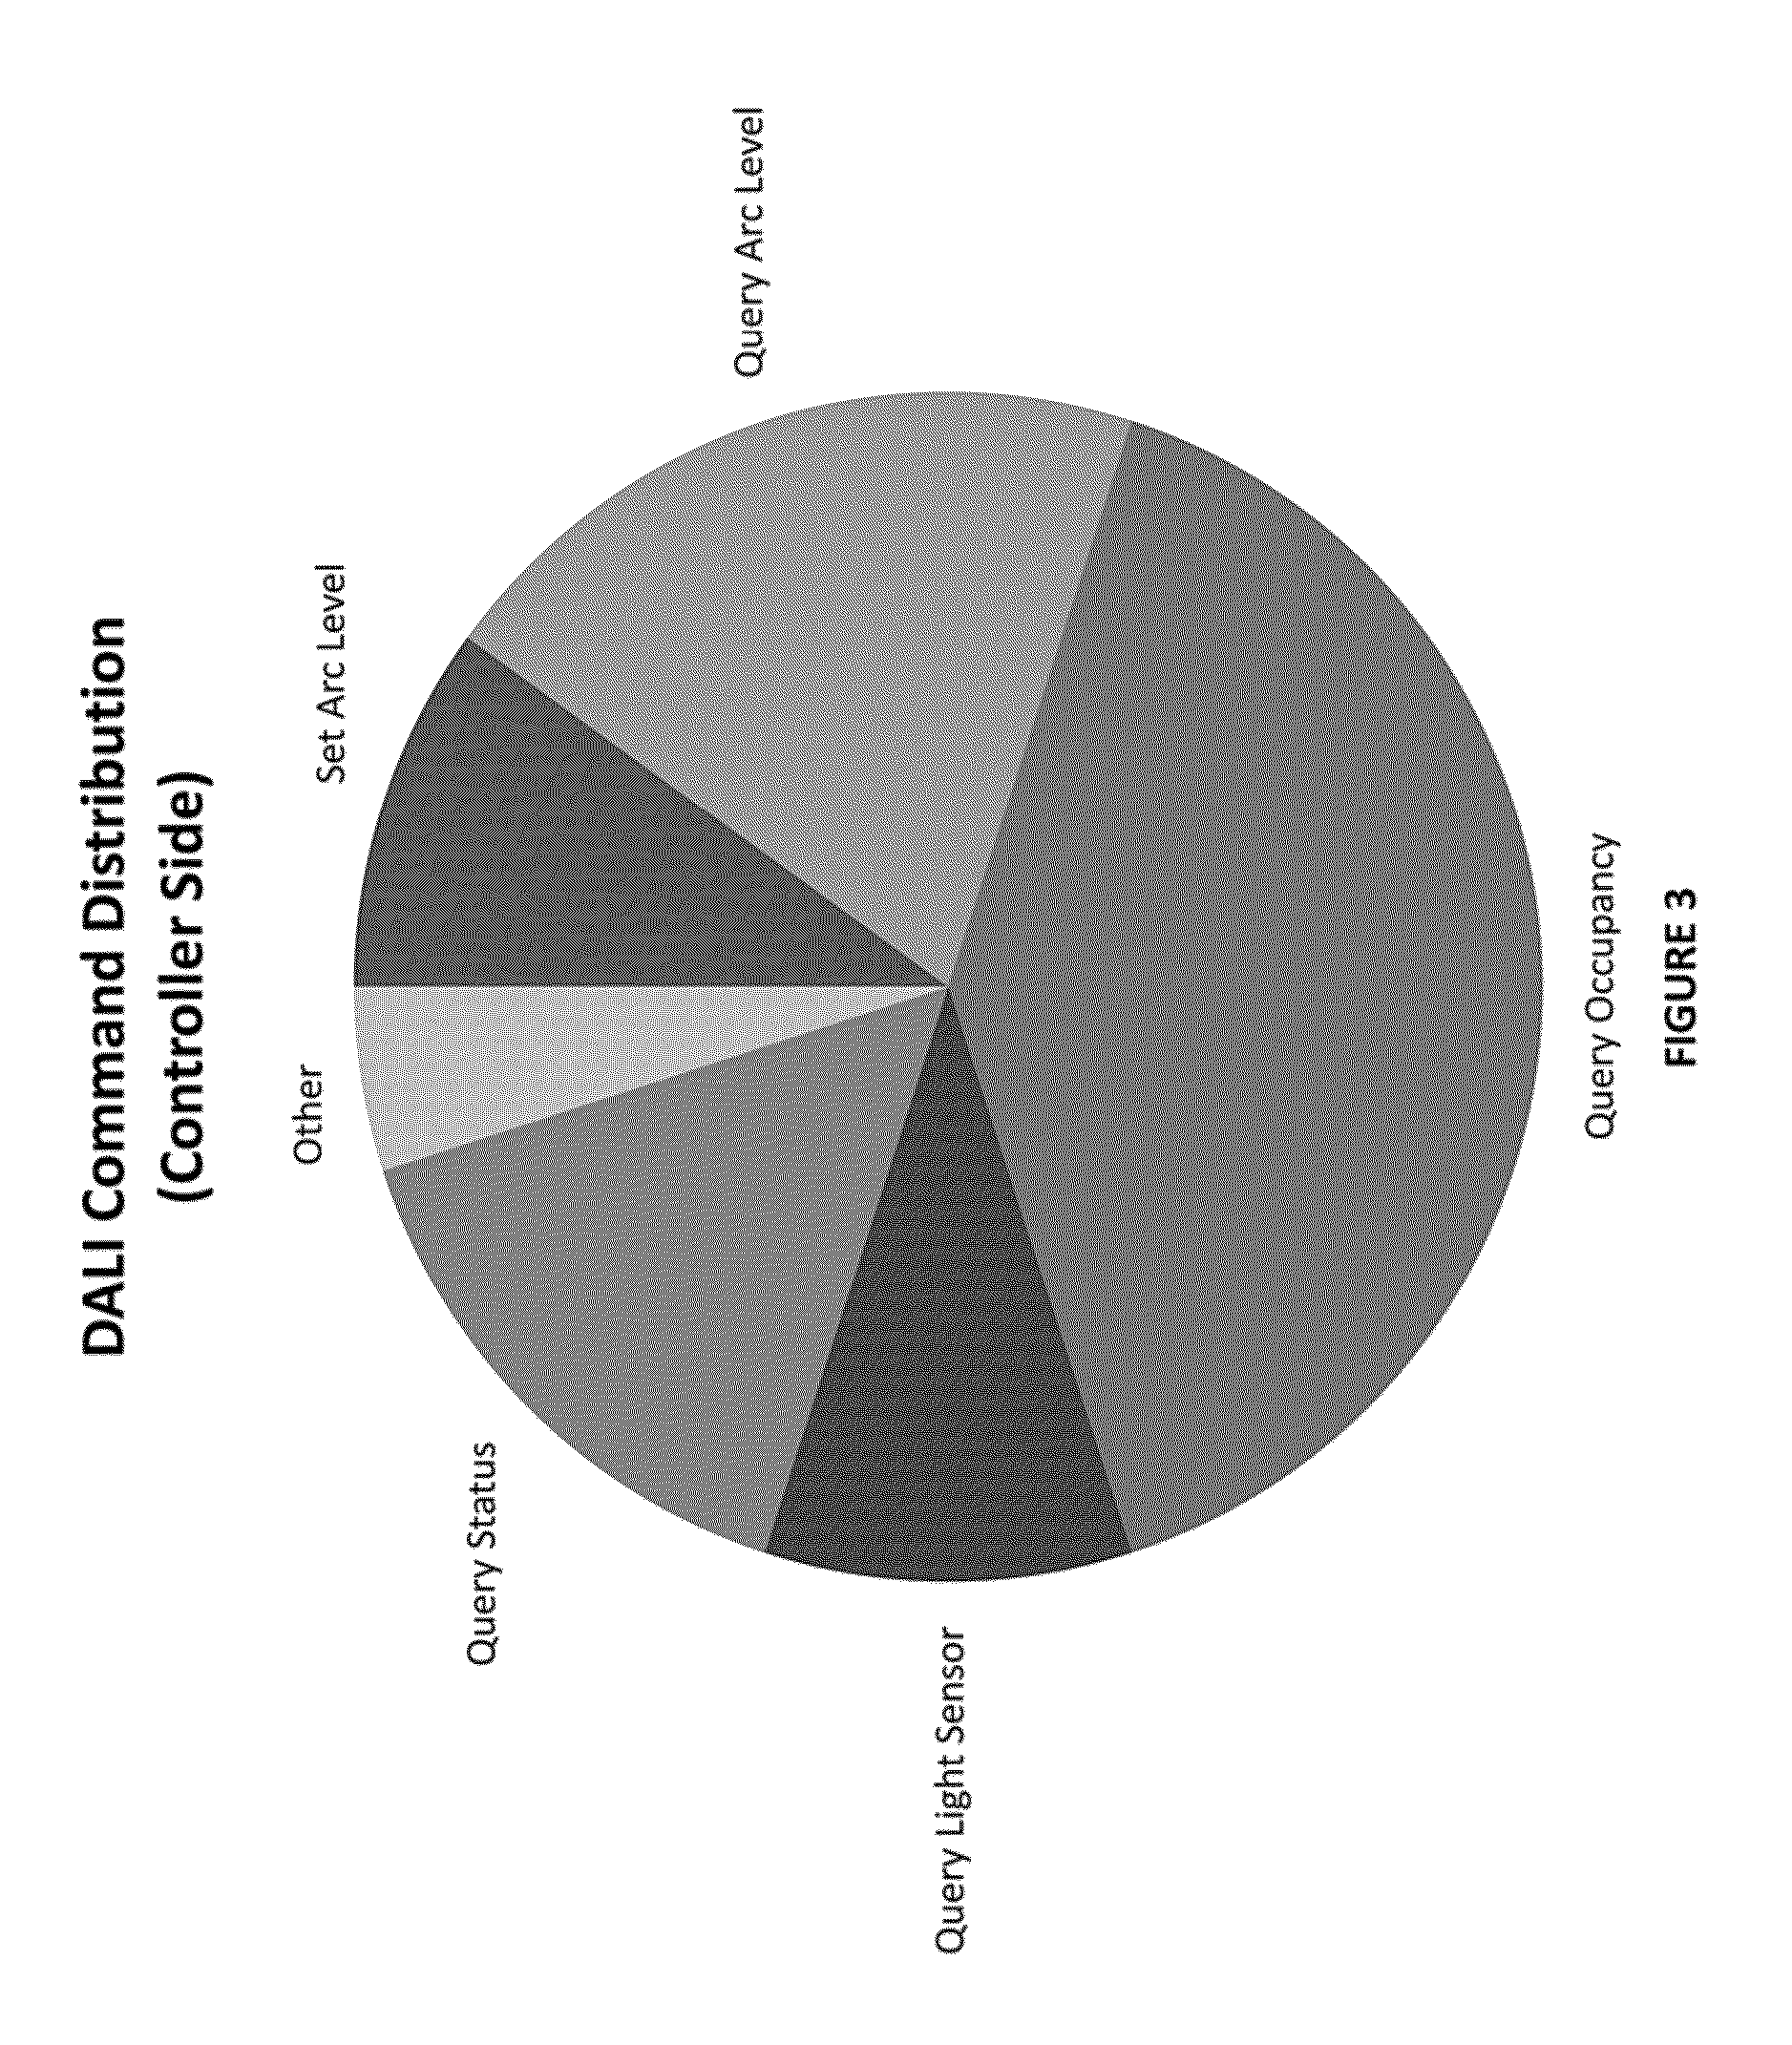 Method of supporting DALI protocol between DALI controllers and devices over an intermediate communication protocol